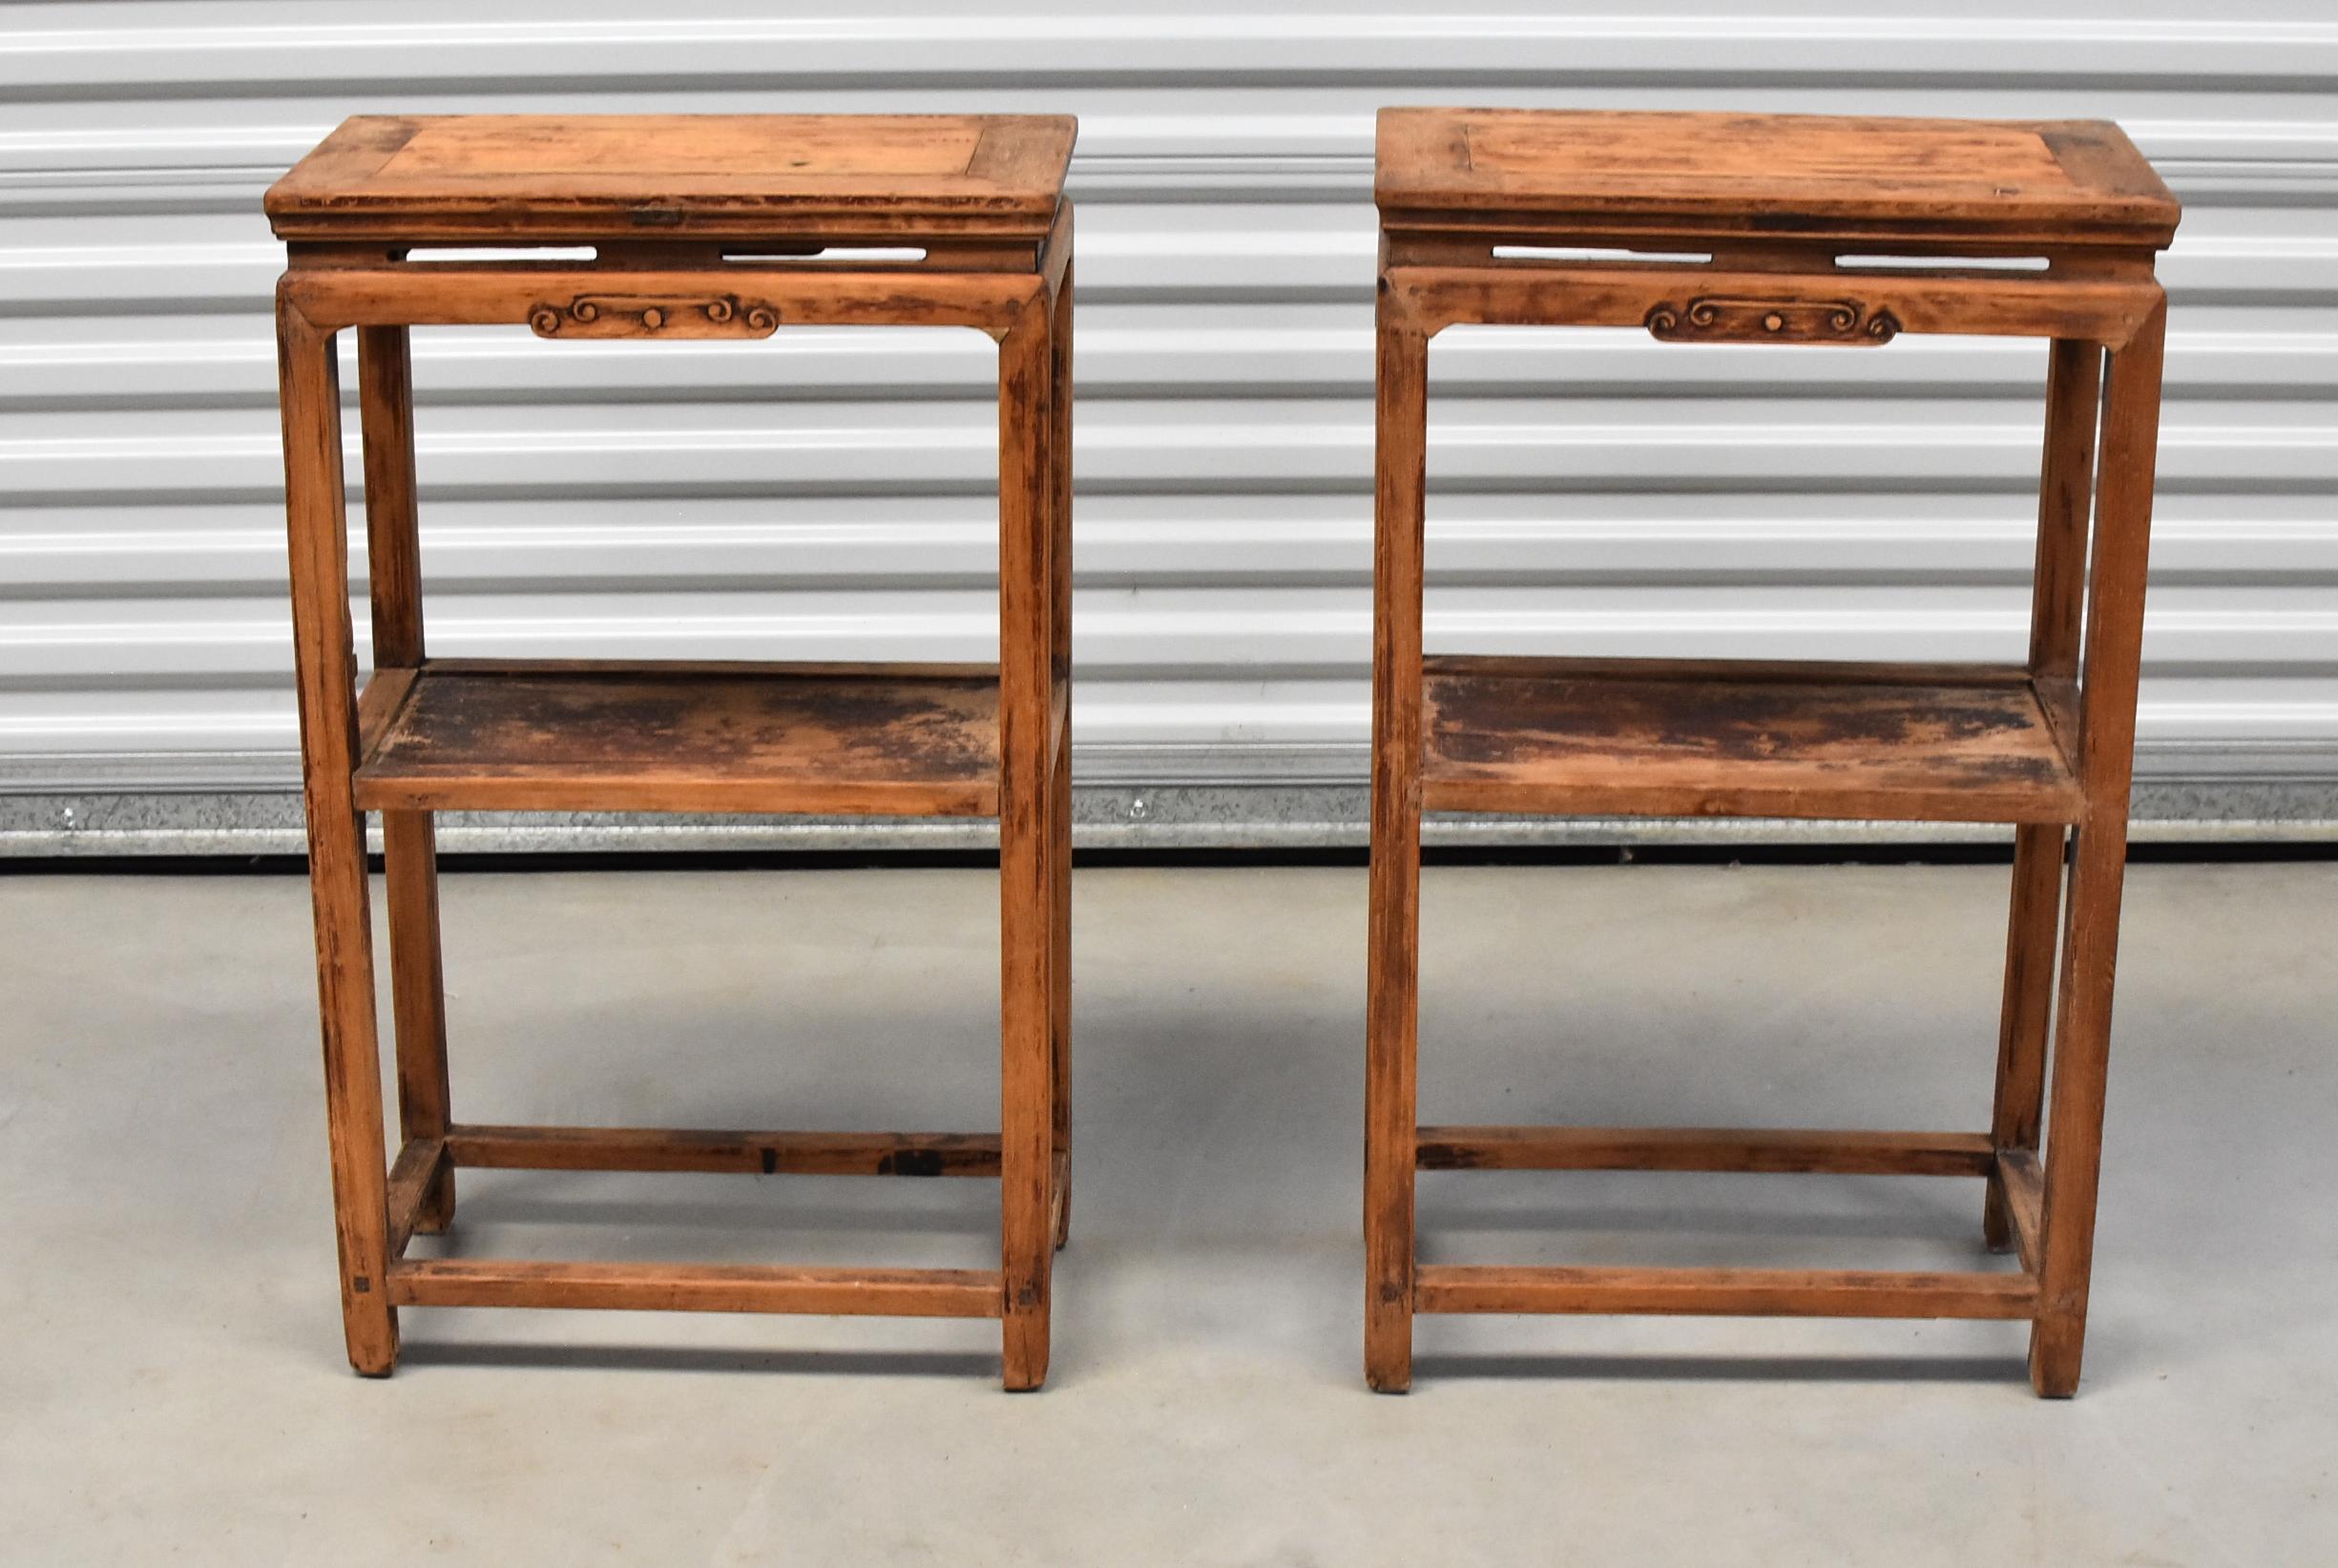 A pair of 19th century Chinese side tables. This pair of tables have beautiful narrow lines. The style is very much a Ming design, with elegant lines void of frivolous decorations. All original. Solid wood. Tenons and mortises.